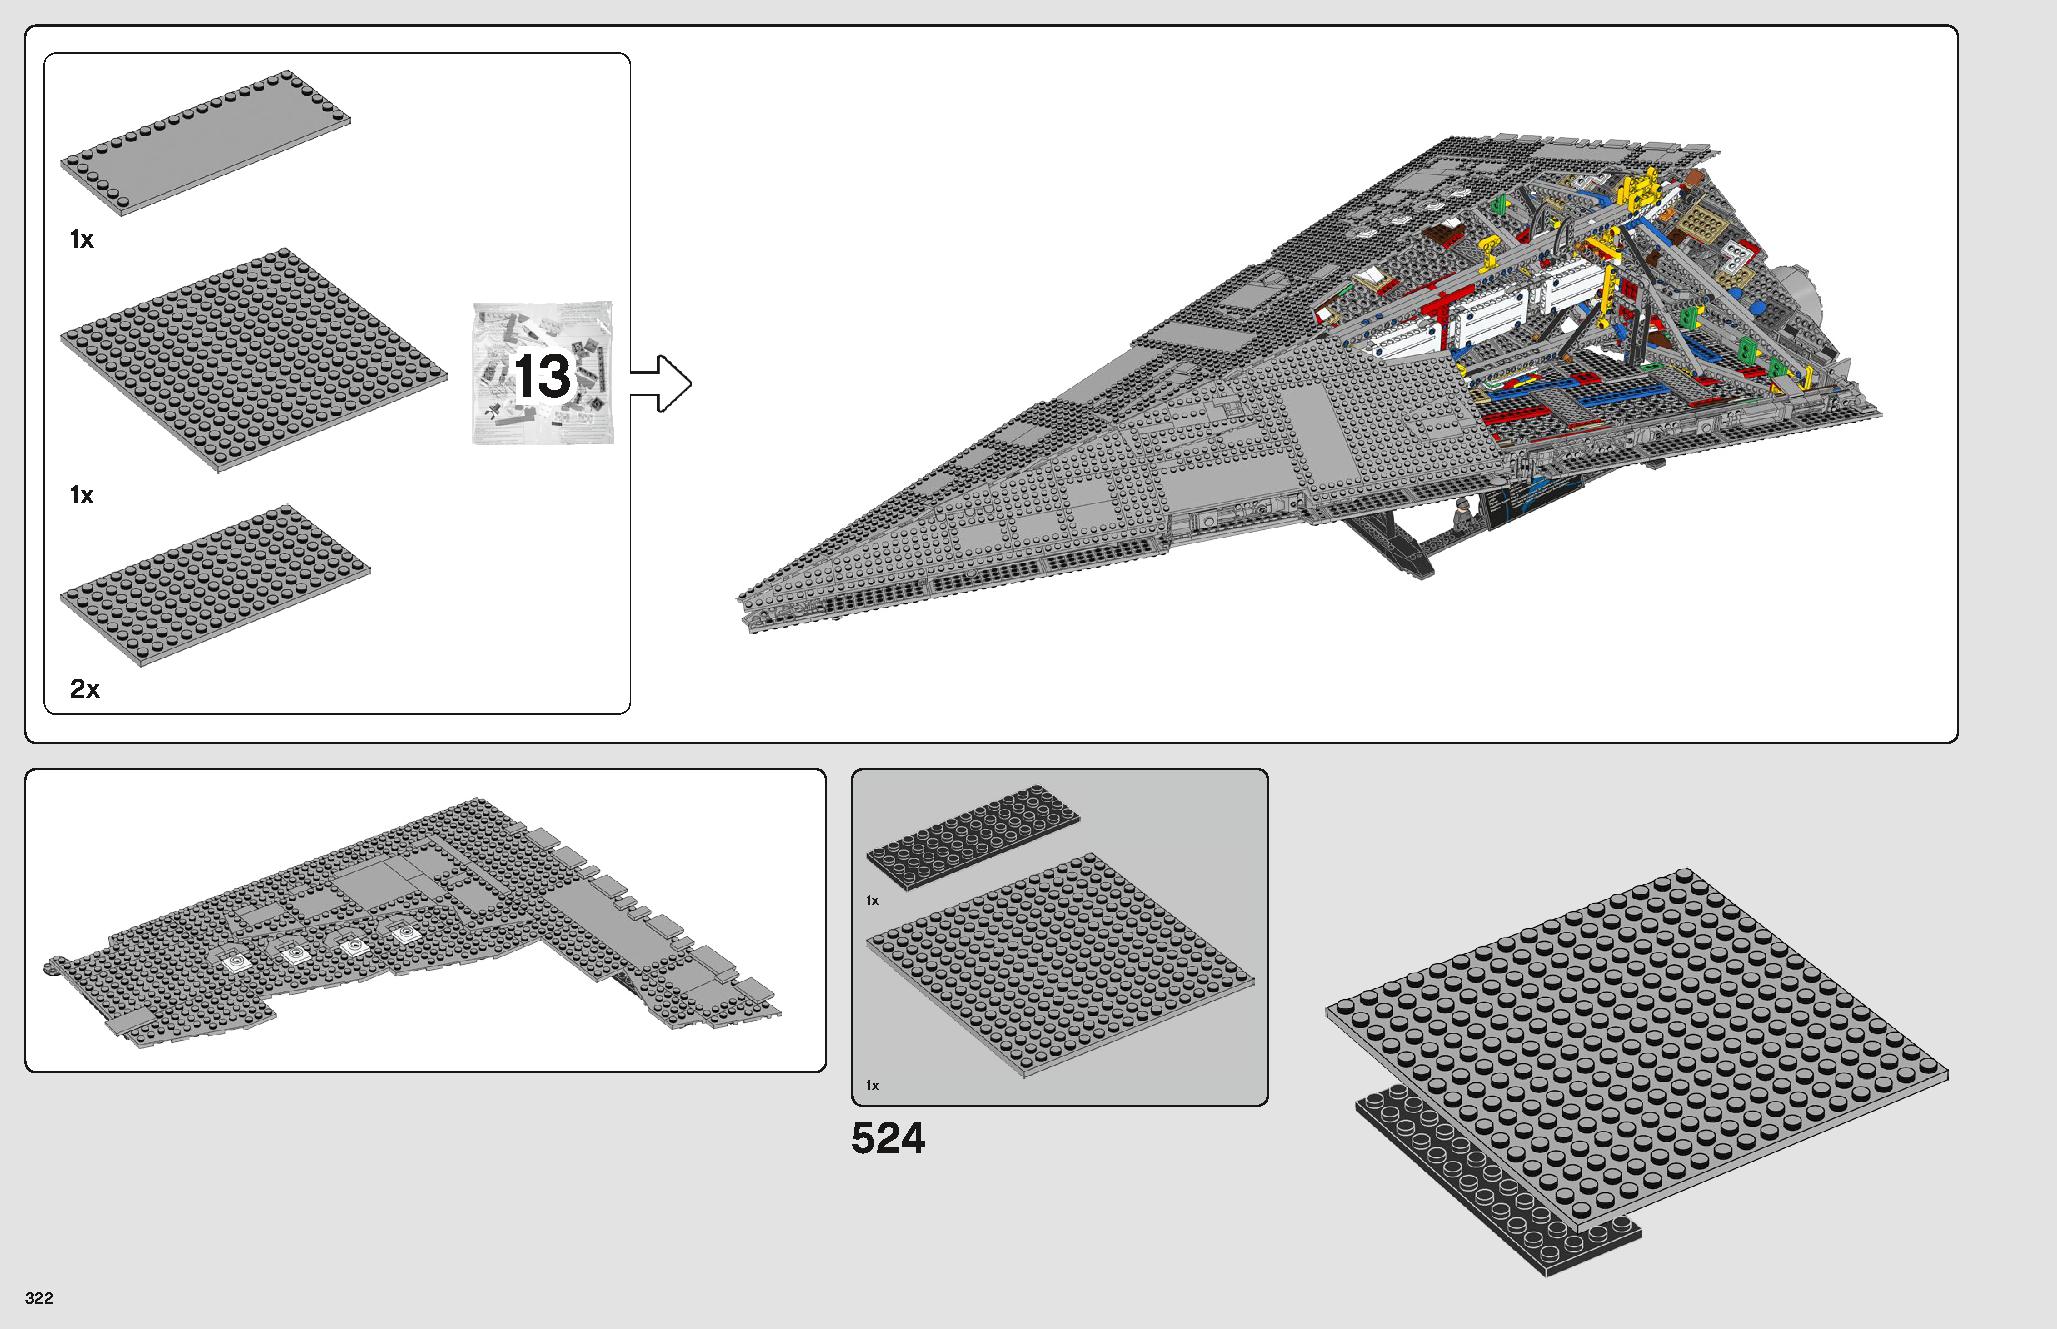 Imperial Star Destroyer 75252 LEGO information LEGO instructions 322 page